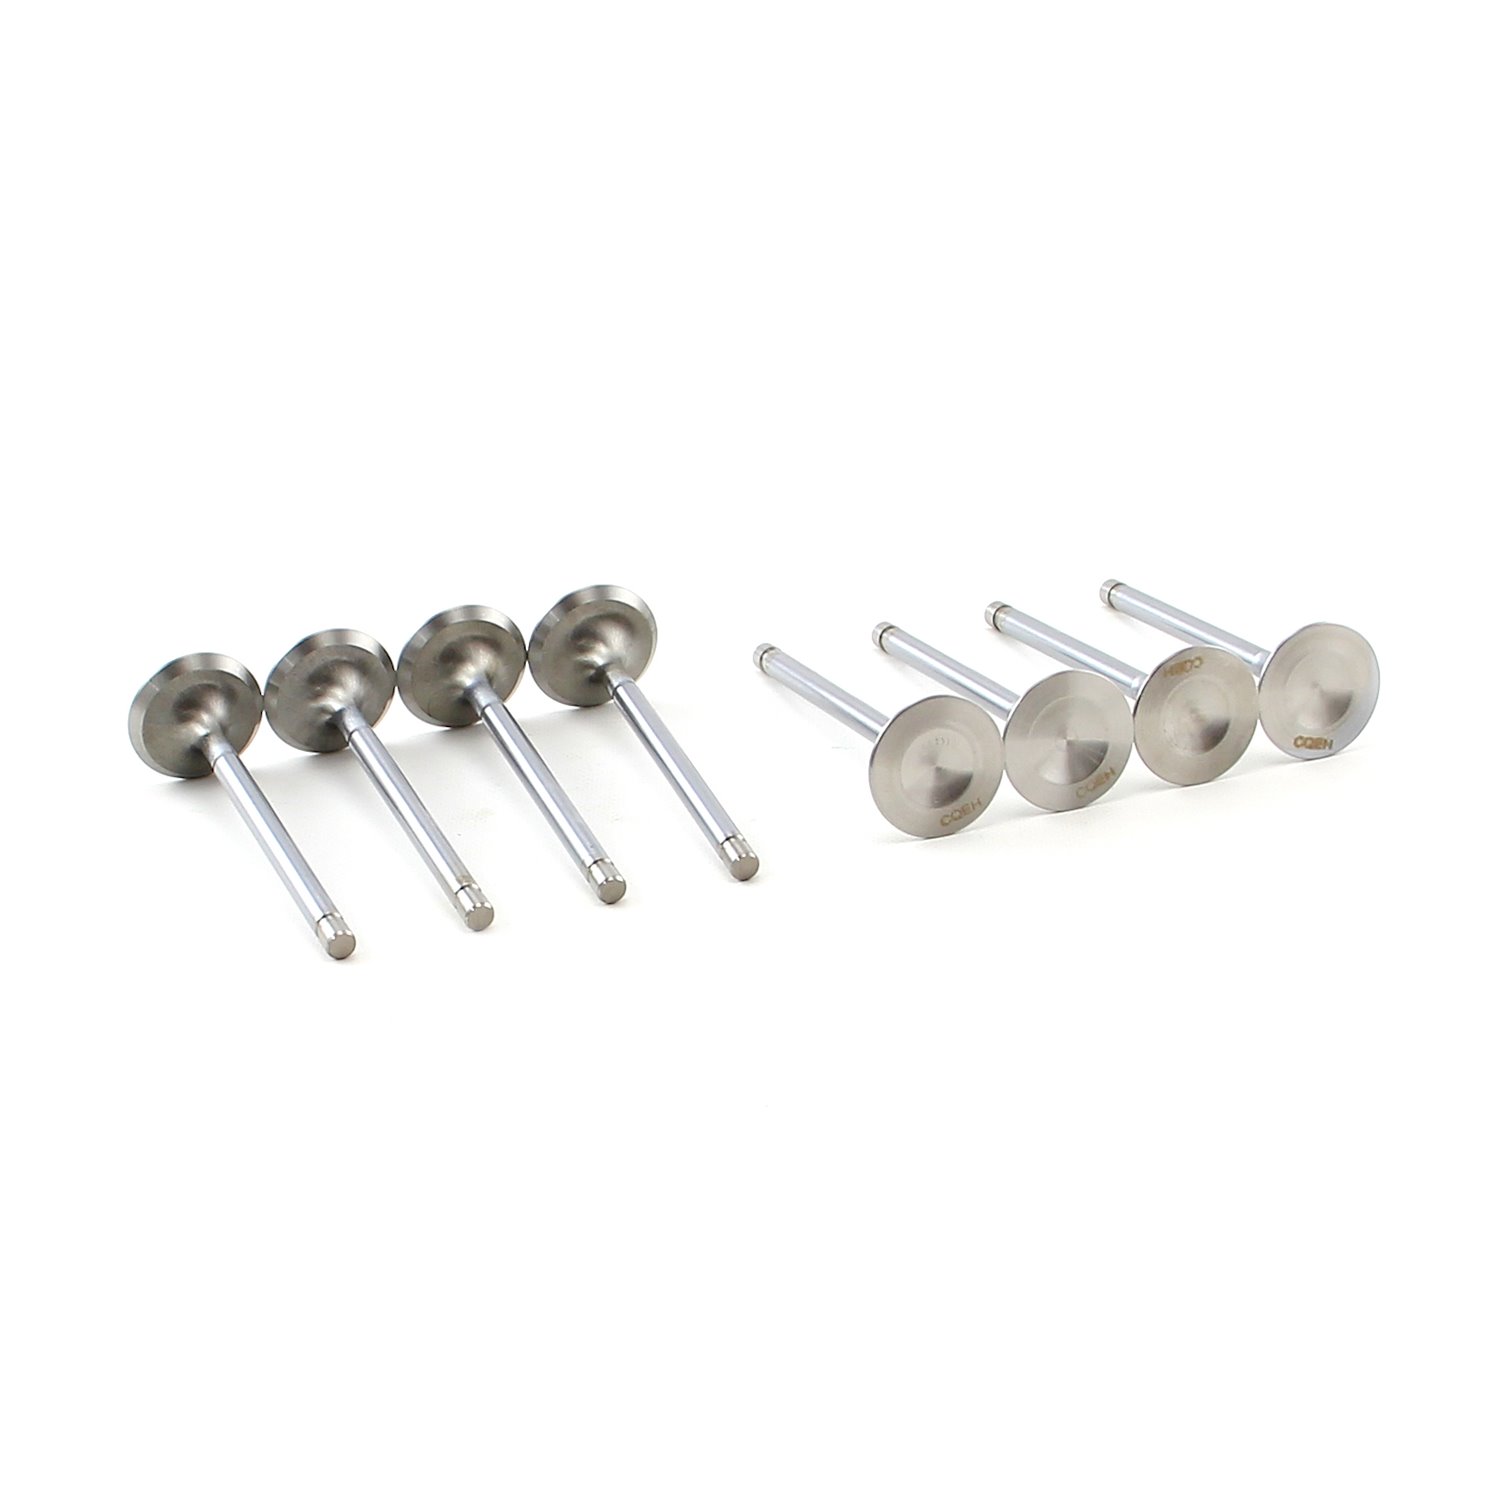 Ford 429 460 1.760 +Std 11/32 Stainless Steel Exhaust Valves Set 8Pcs